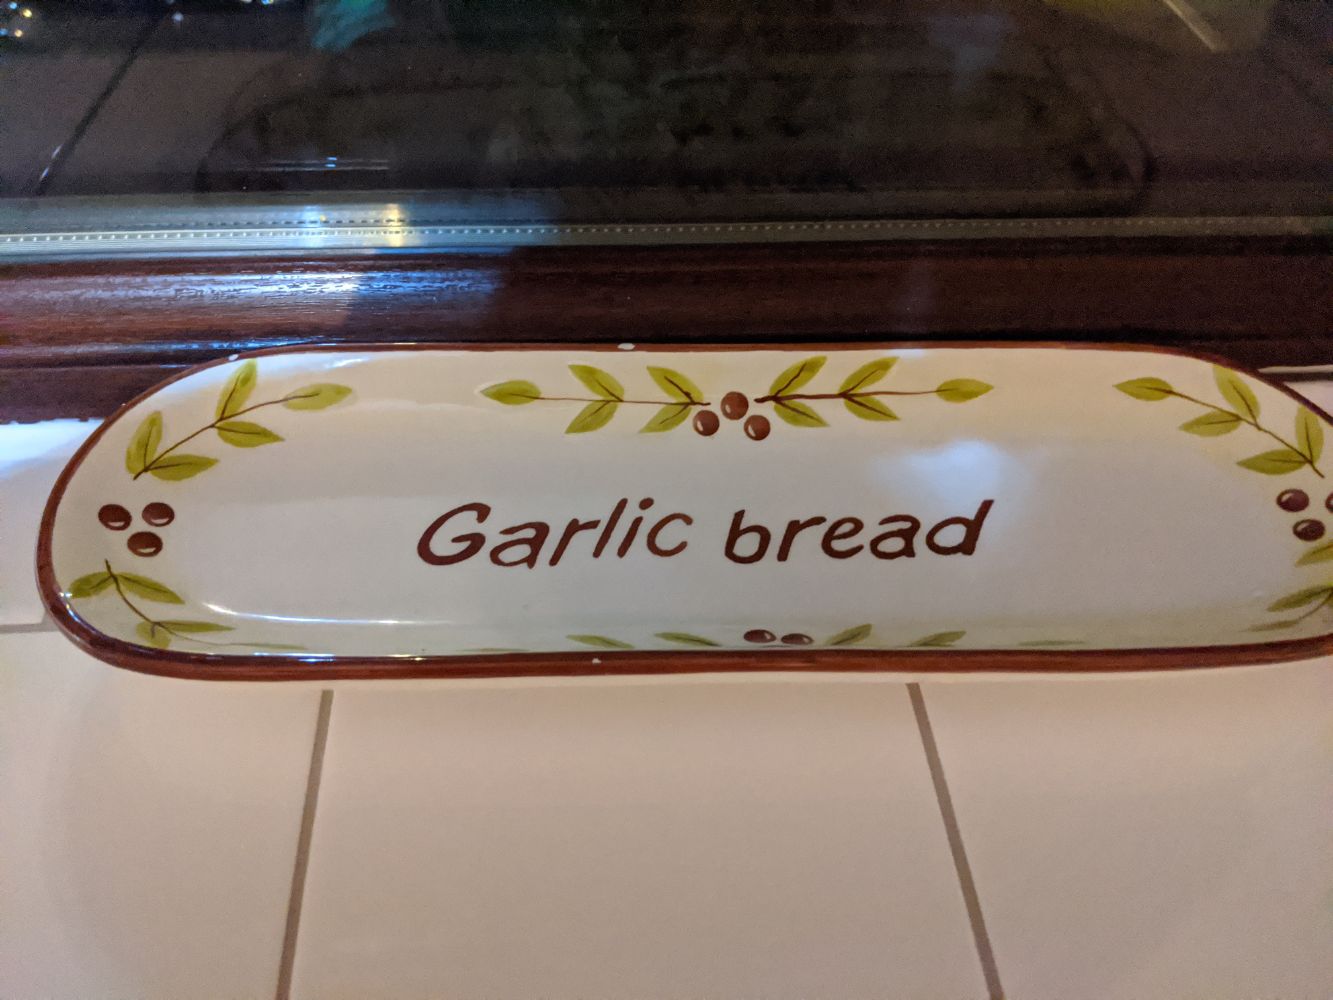 Serving tray with "garlic bread" written on it, referencing the 2016 meme